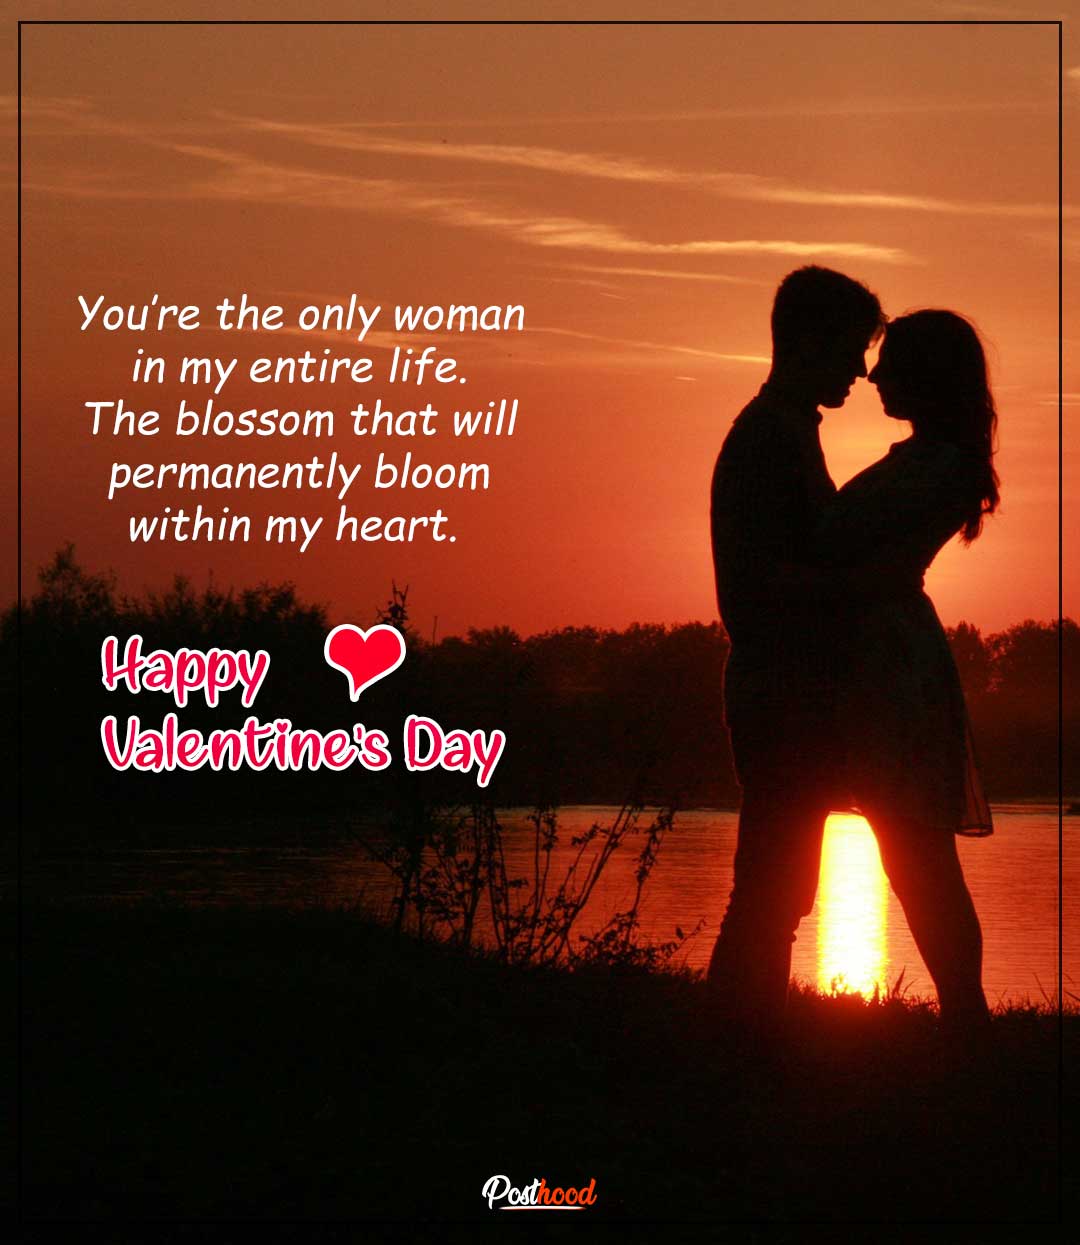 25 sweet love messages to impress your girlfriend. Send your love with these cute valentine's day love messages. 